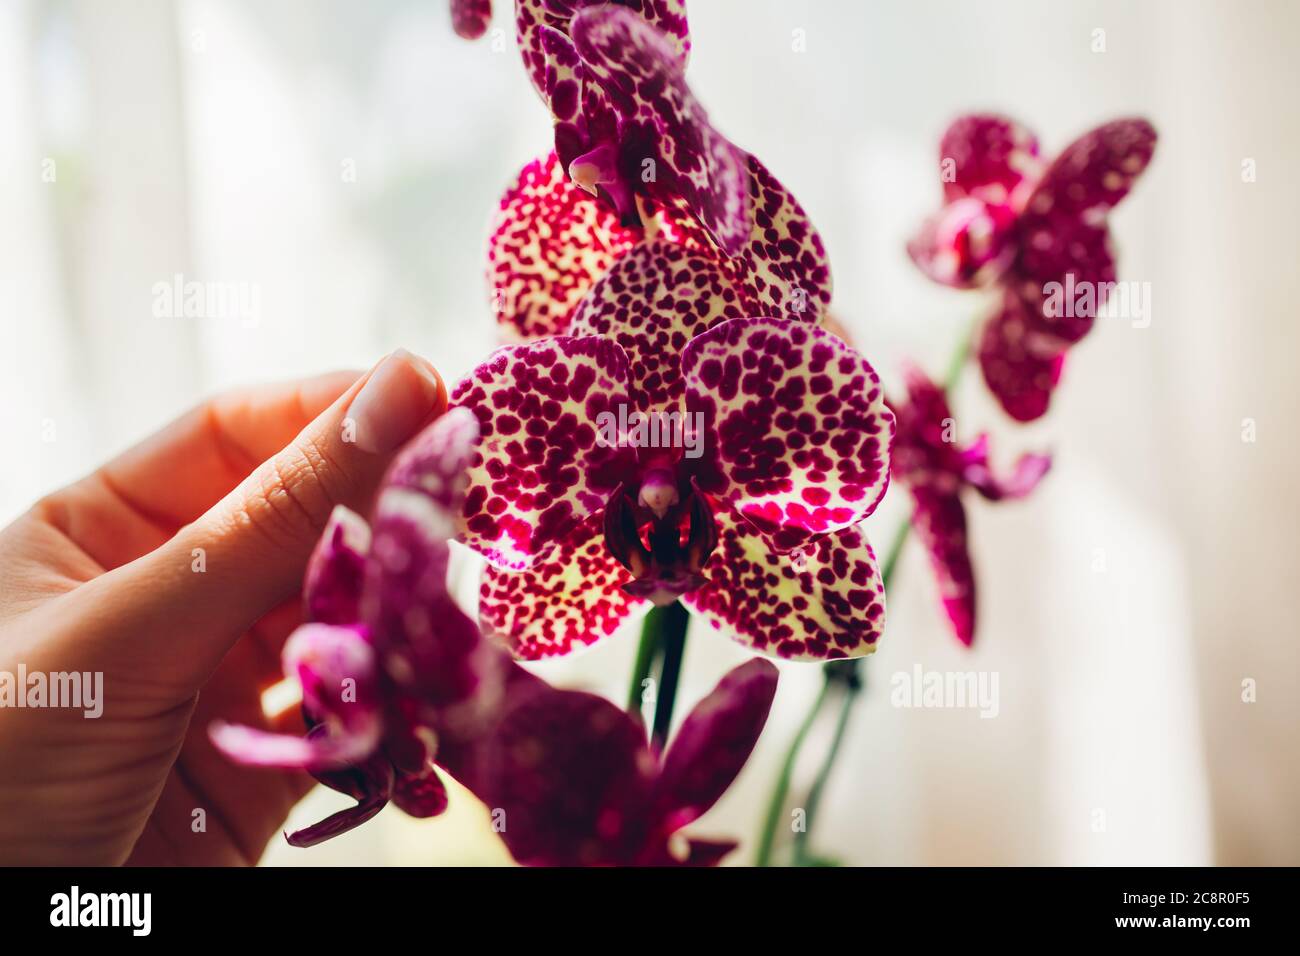 Wild cat orchid phalaenopsis. Woman taking care of home plants . Close-up of female hands holding violet flowers Stock Photo